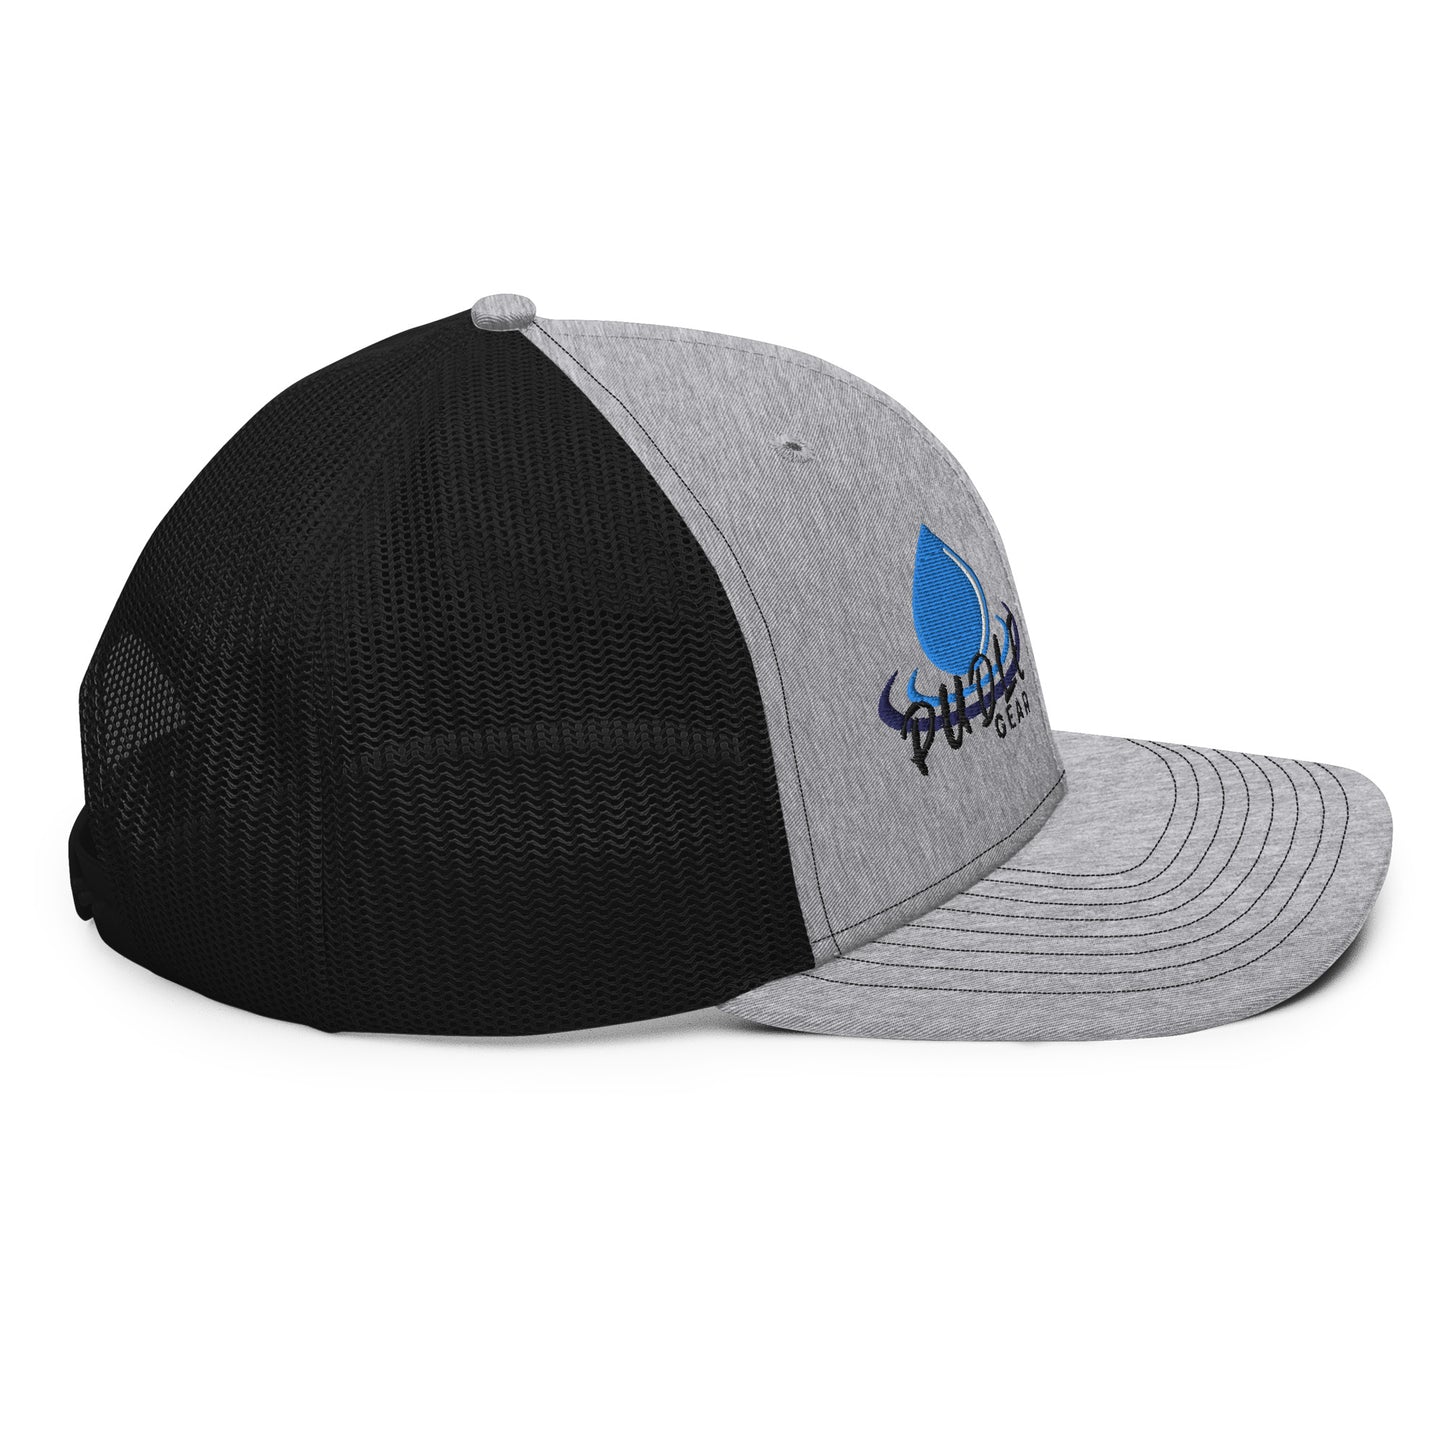 PUDLE Gear Embroidered Trucker Cap